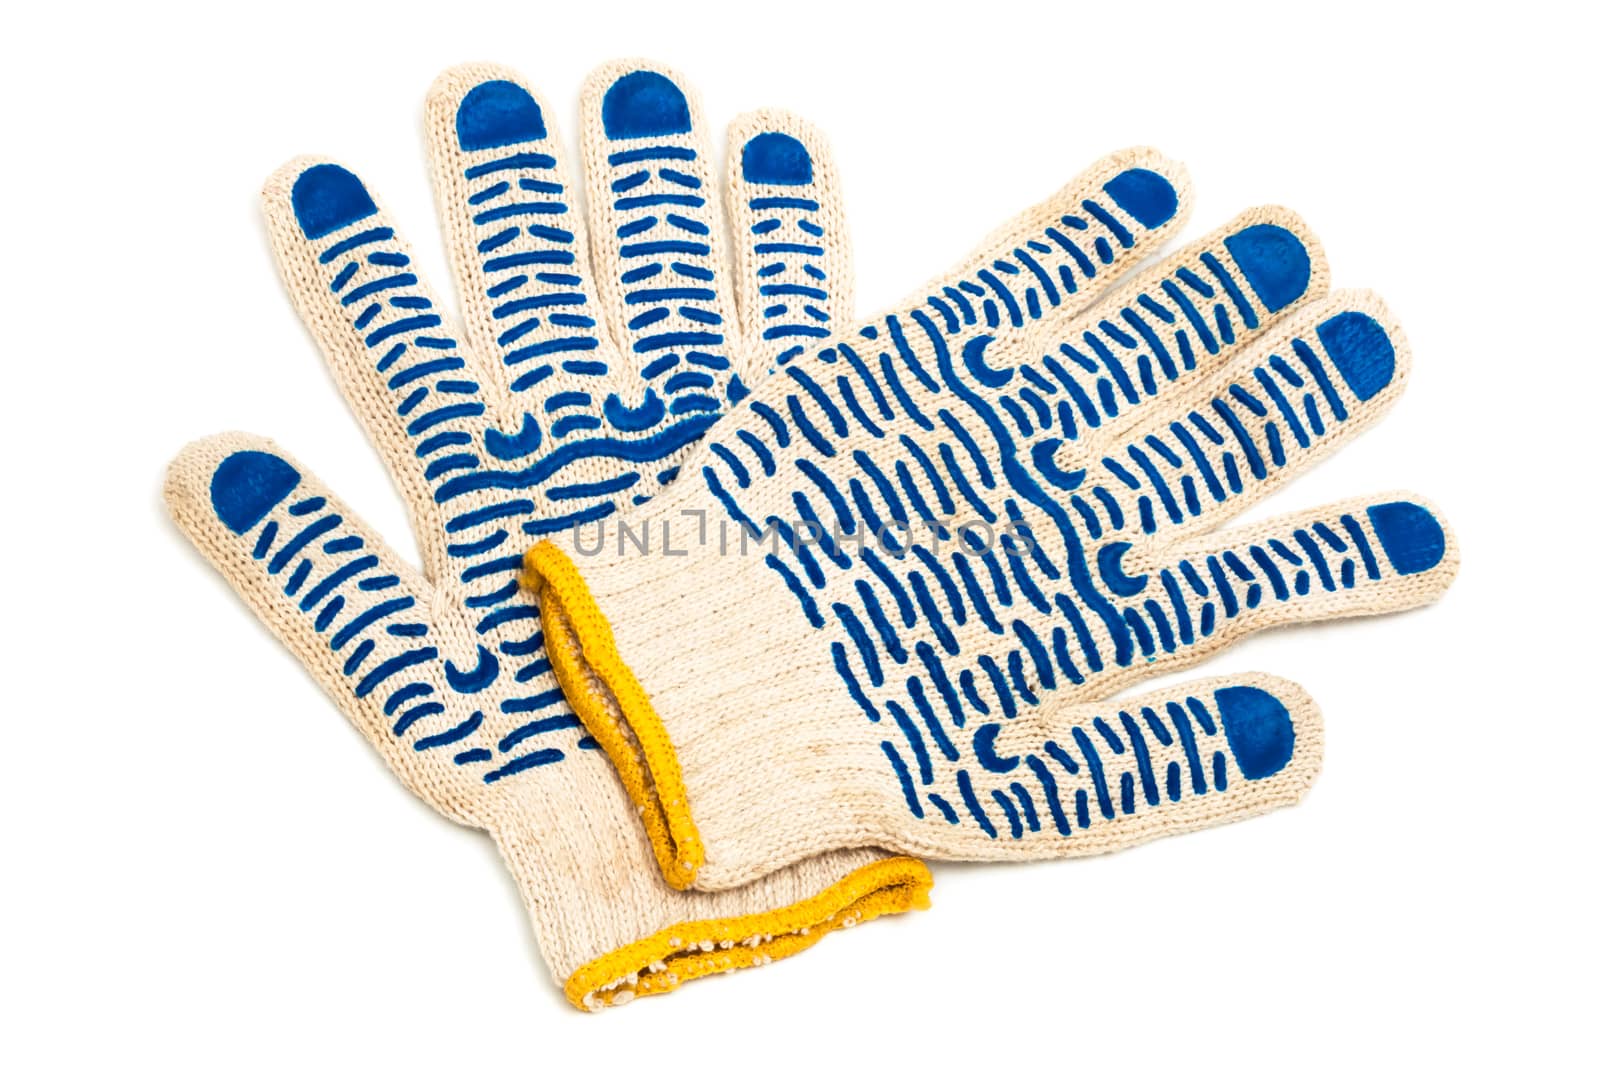 fabric protective gloves on a white background